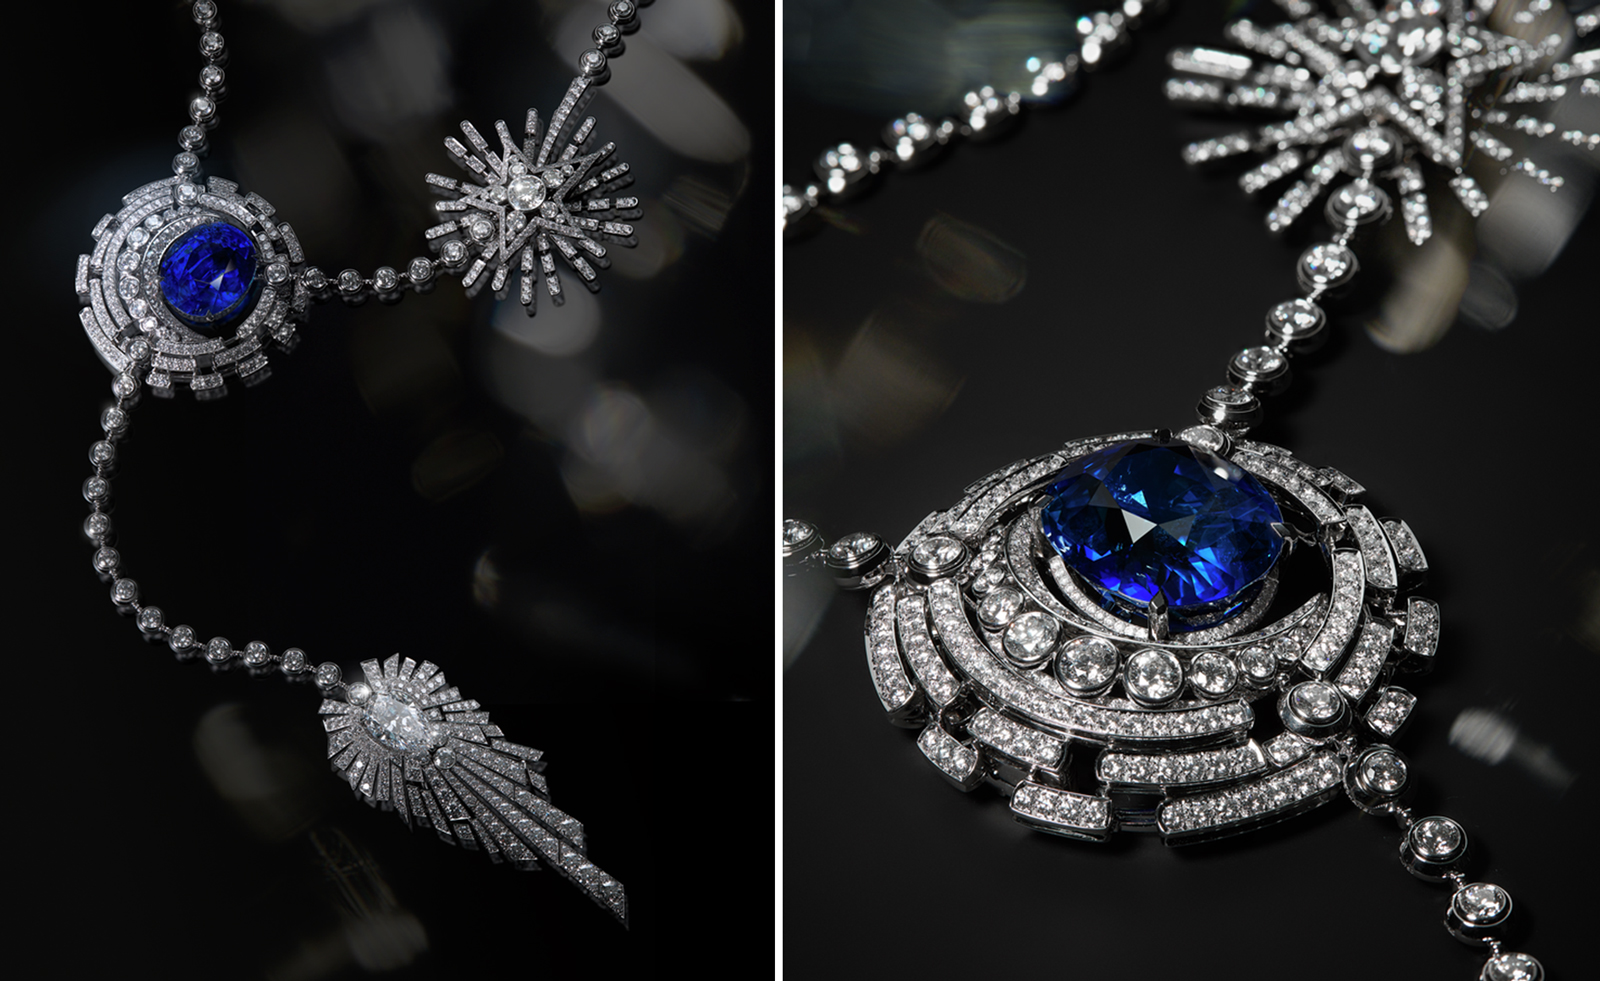 Chanel's Latest High Jewelry Collection Shoots For The Stars